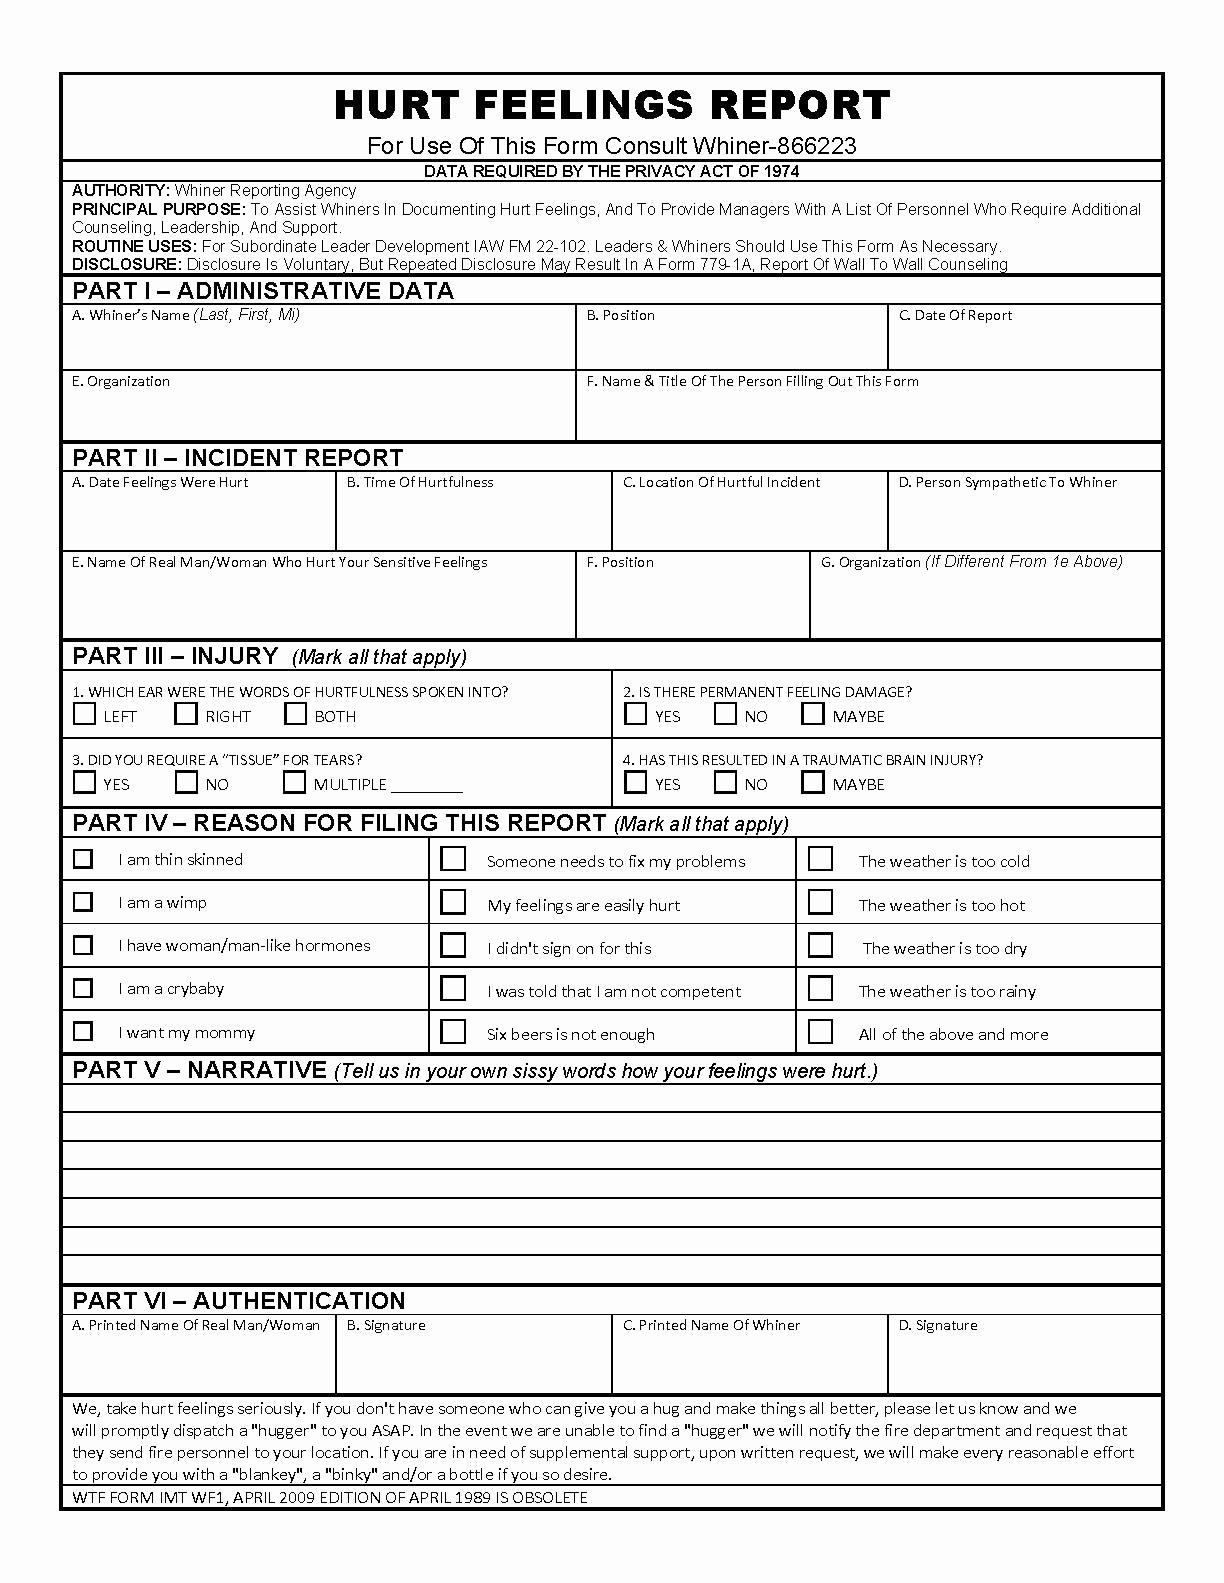 Hurt Feelings Report form Save Your Relationship at